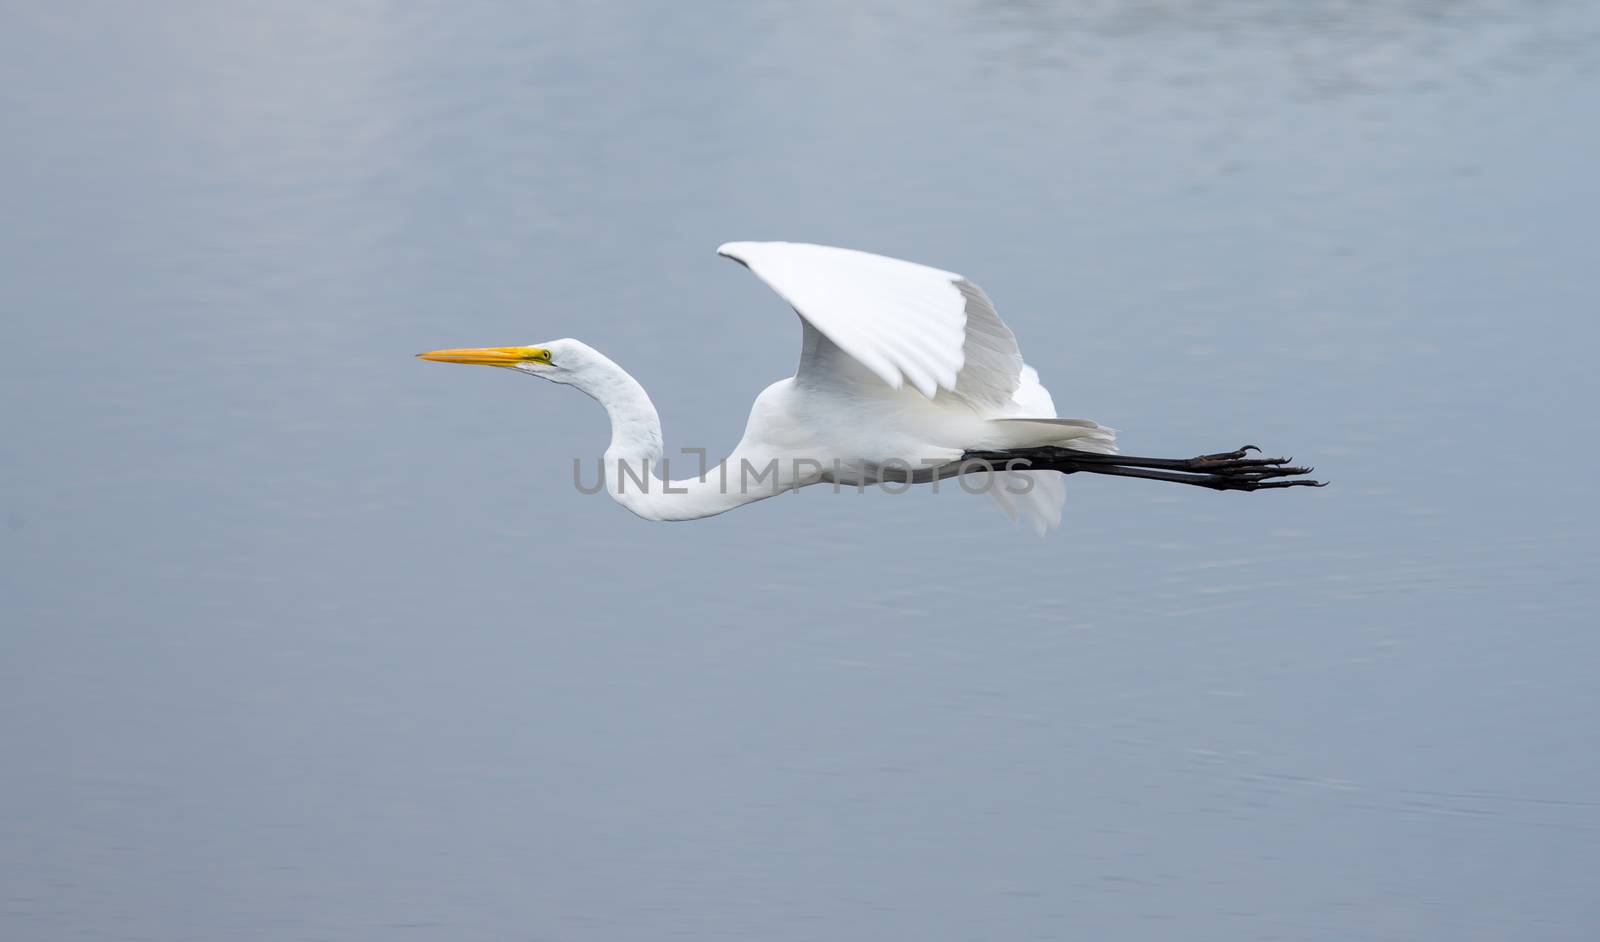 This Great Egret just took-off and is flying over water.